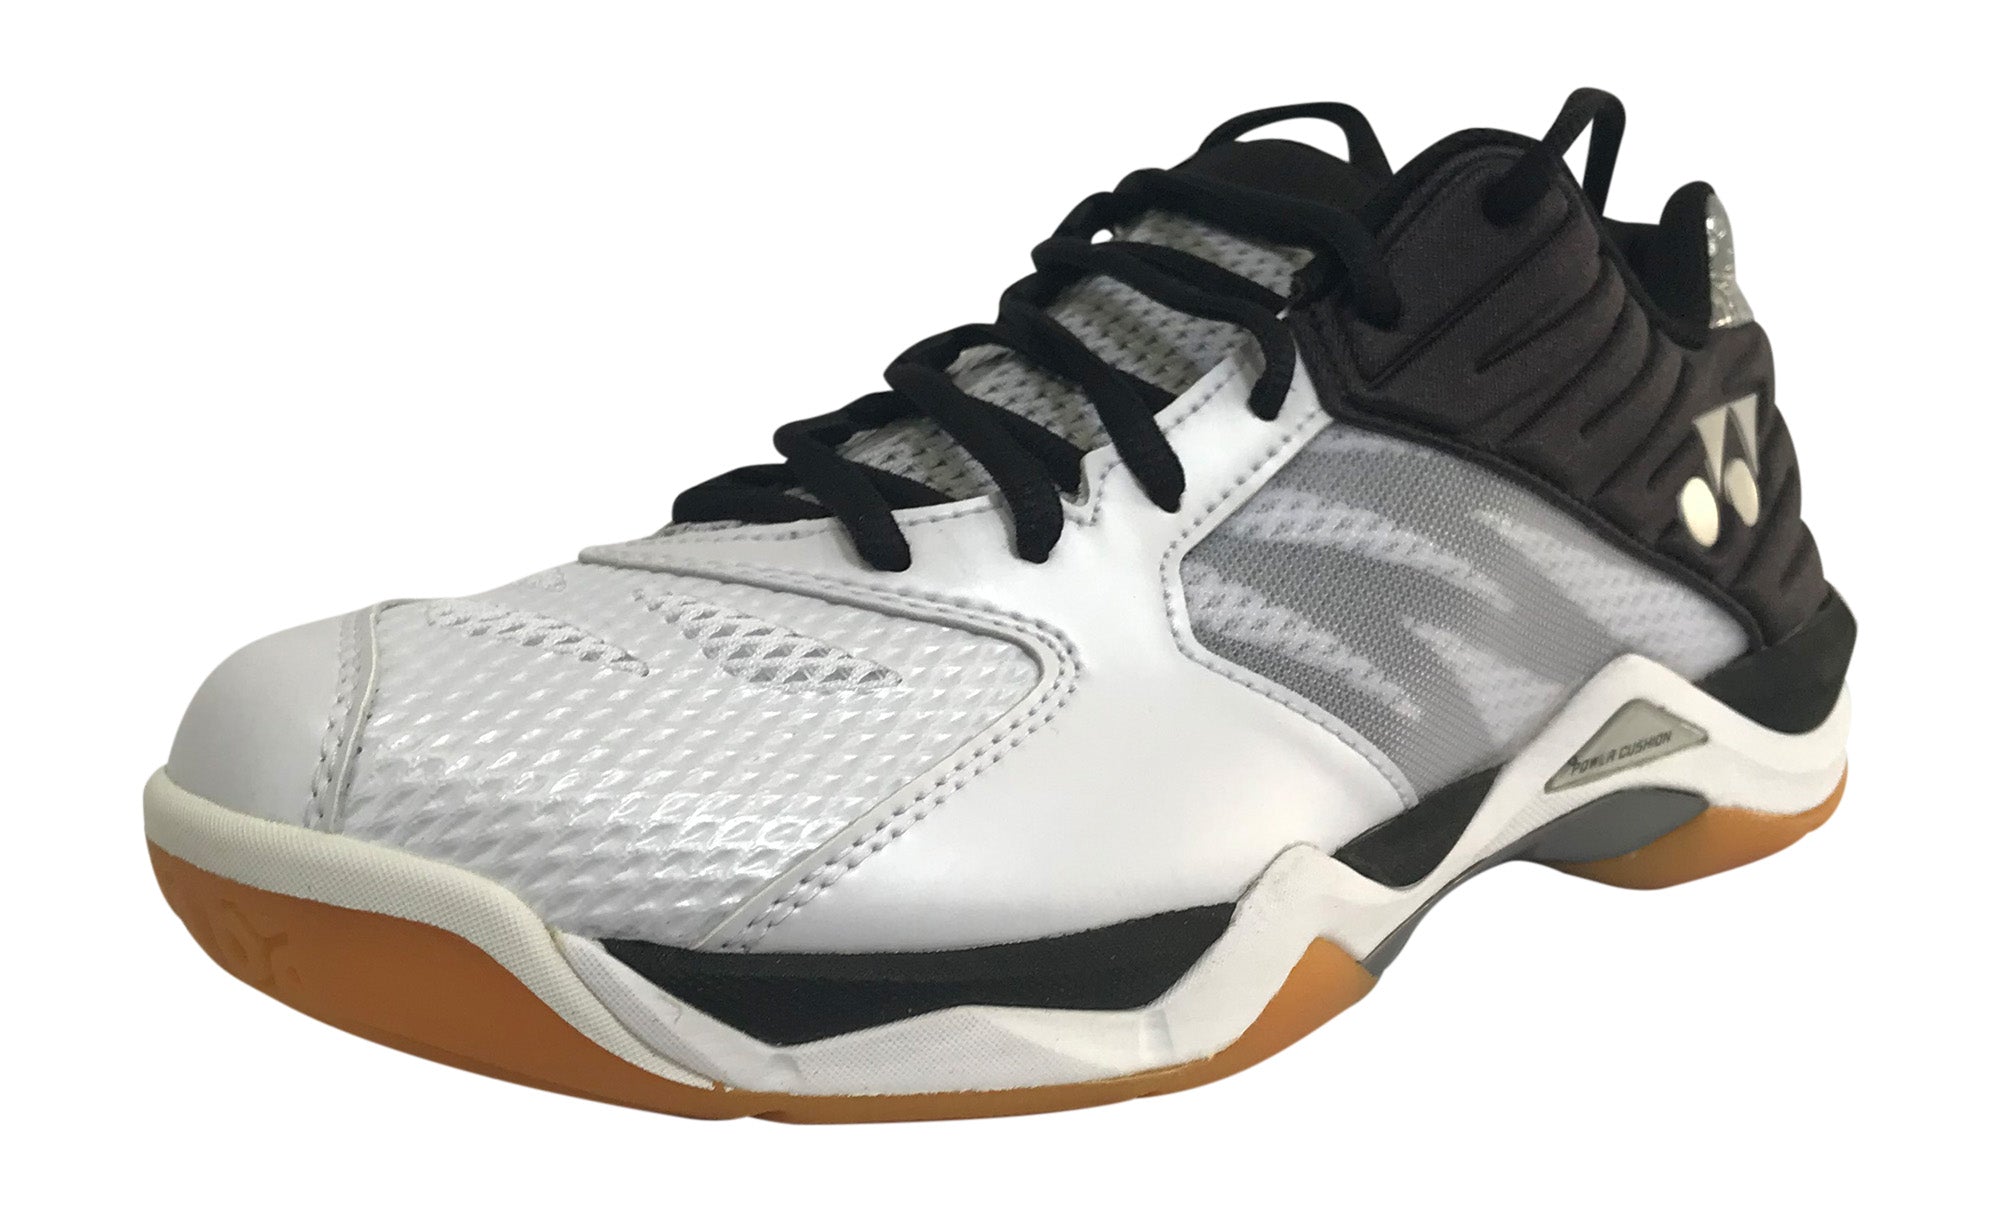 power white sports shoes